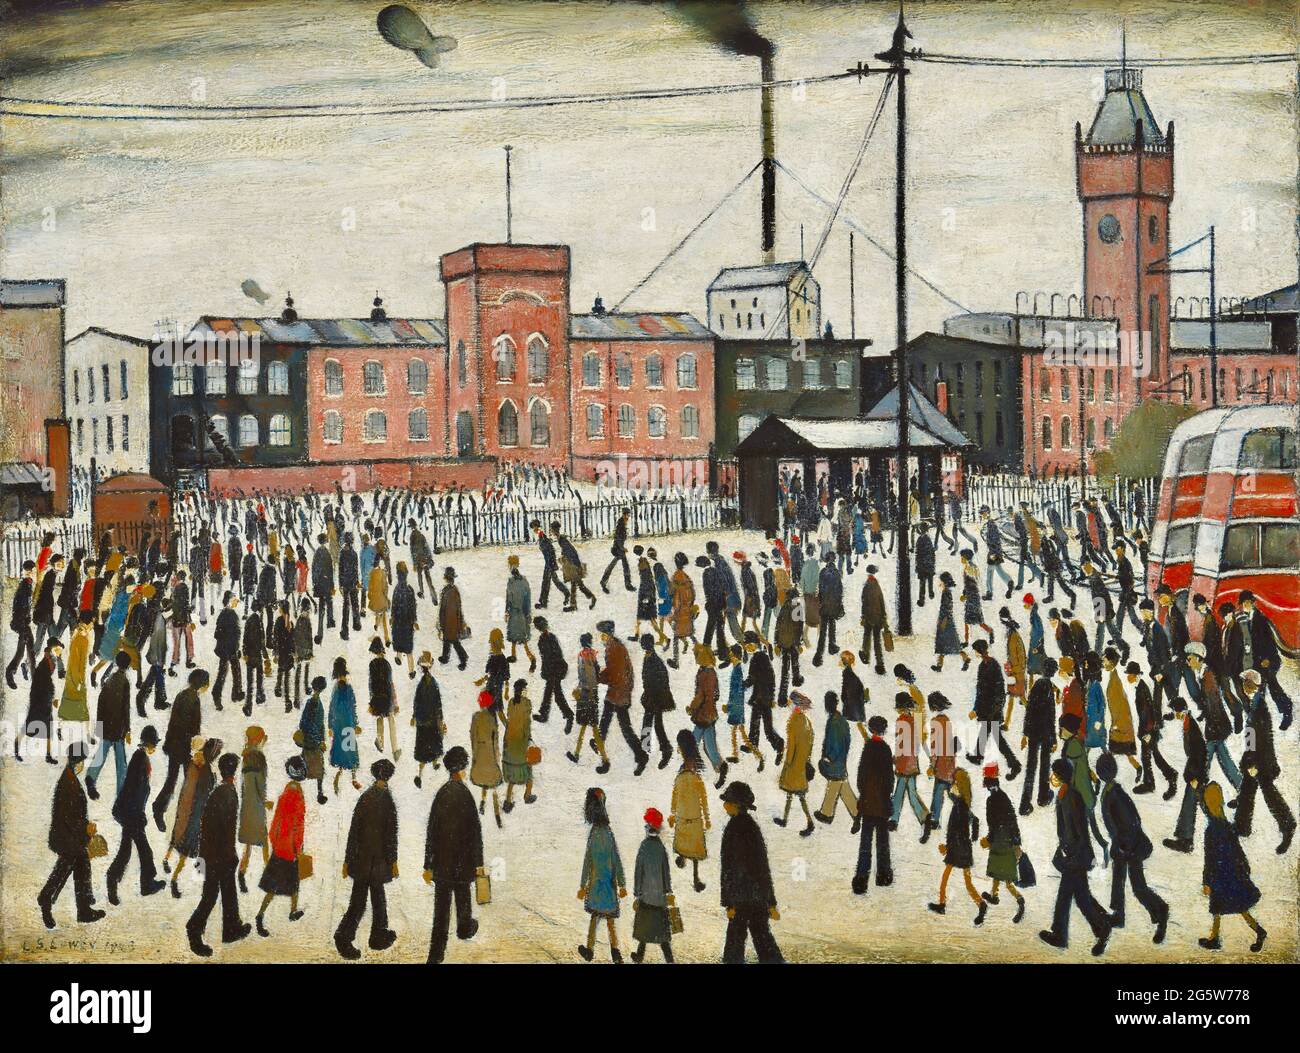 L.S, Lowry - Going to Work - 1943 Stock Photo